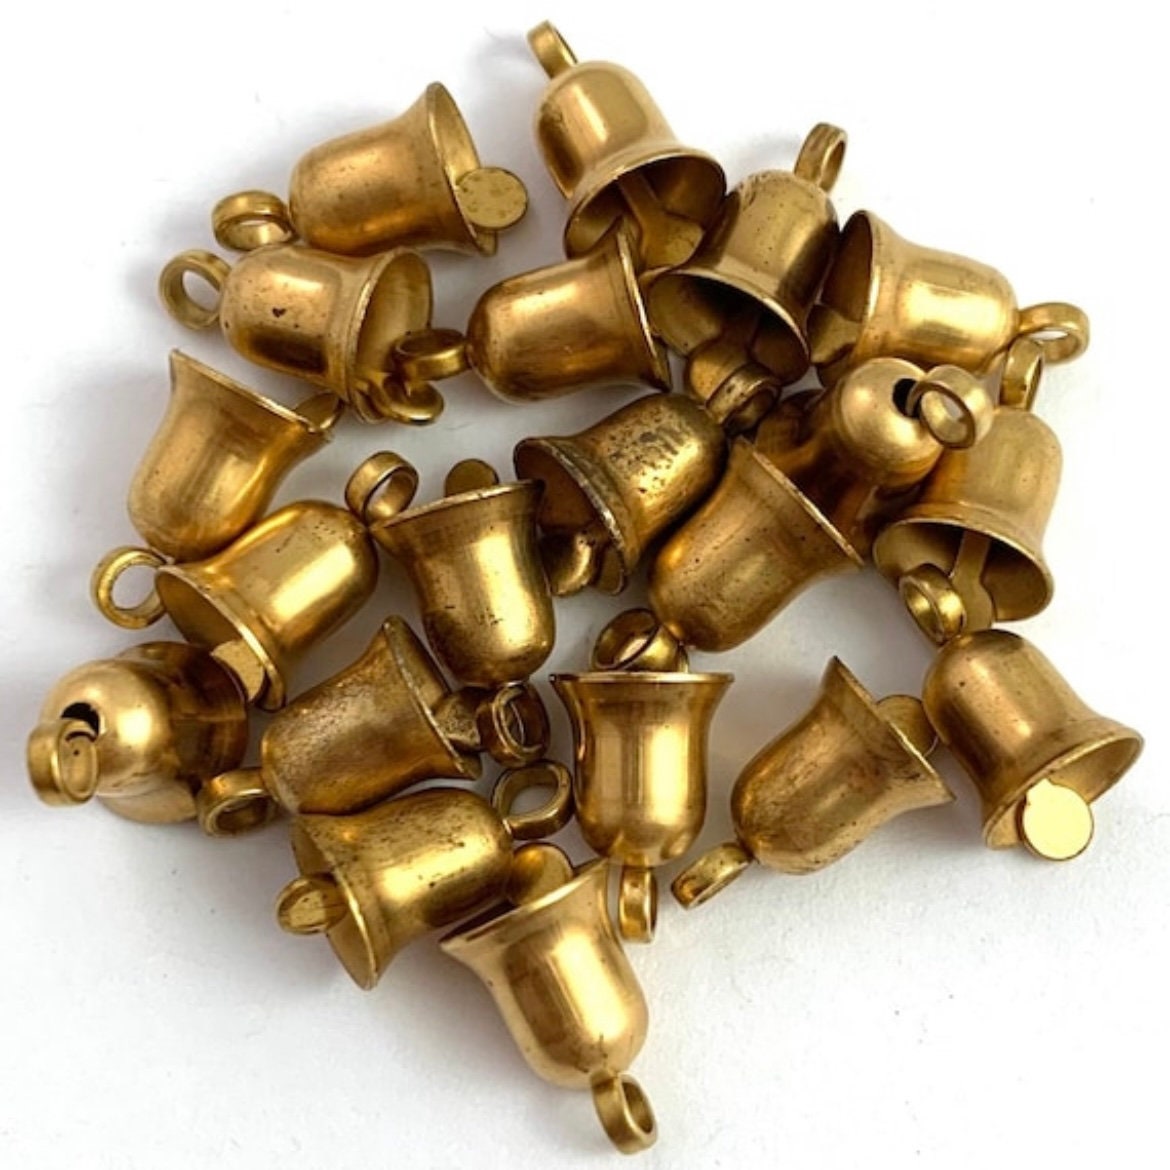 6mm Bell Copper Brown Color Steel. Jewelry Craft Supply. Bell